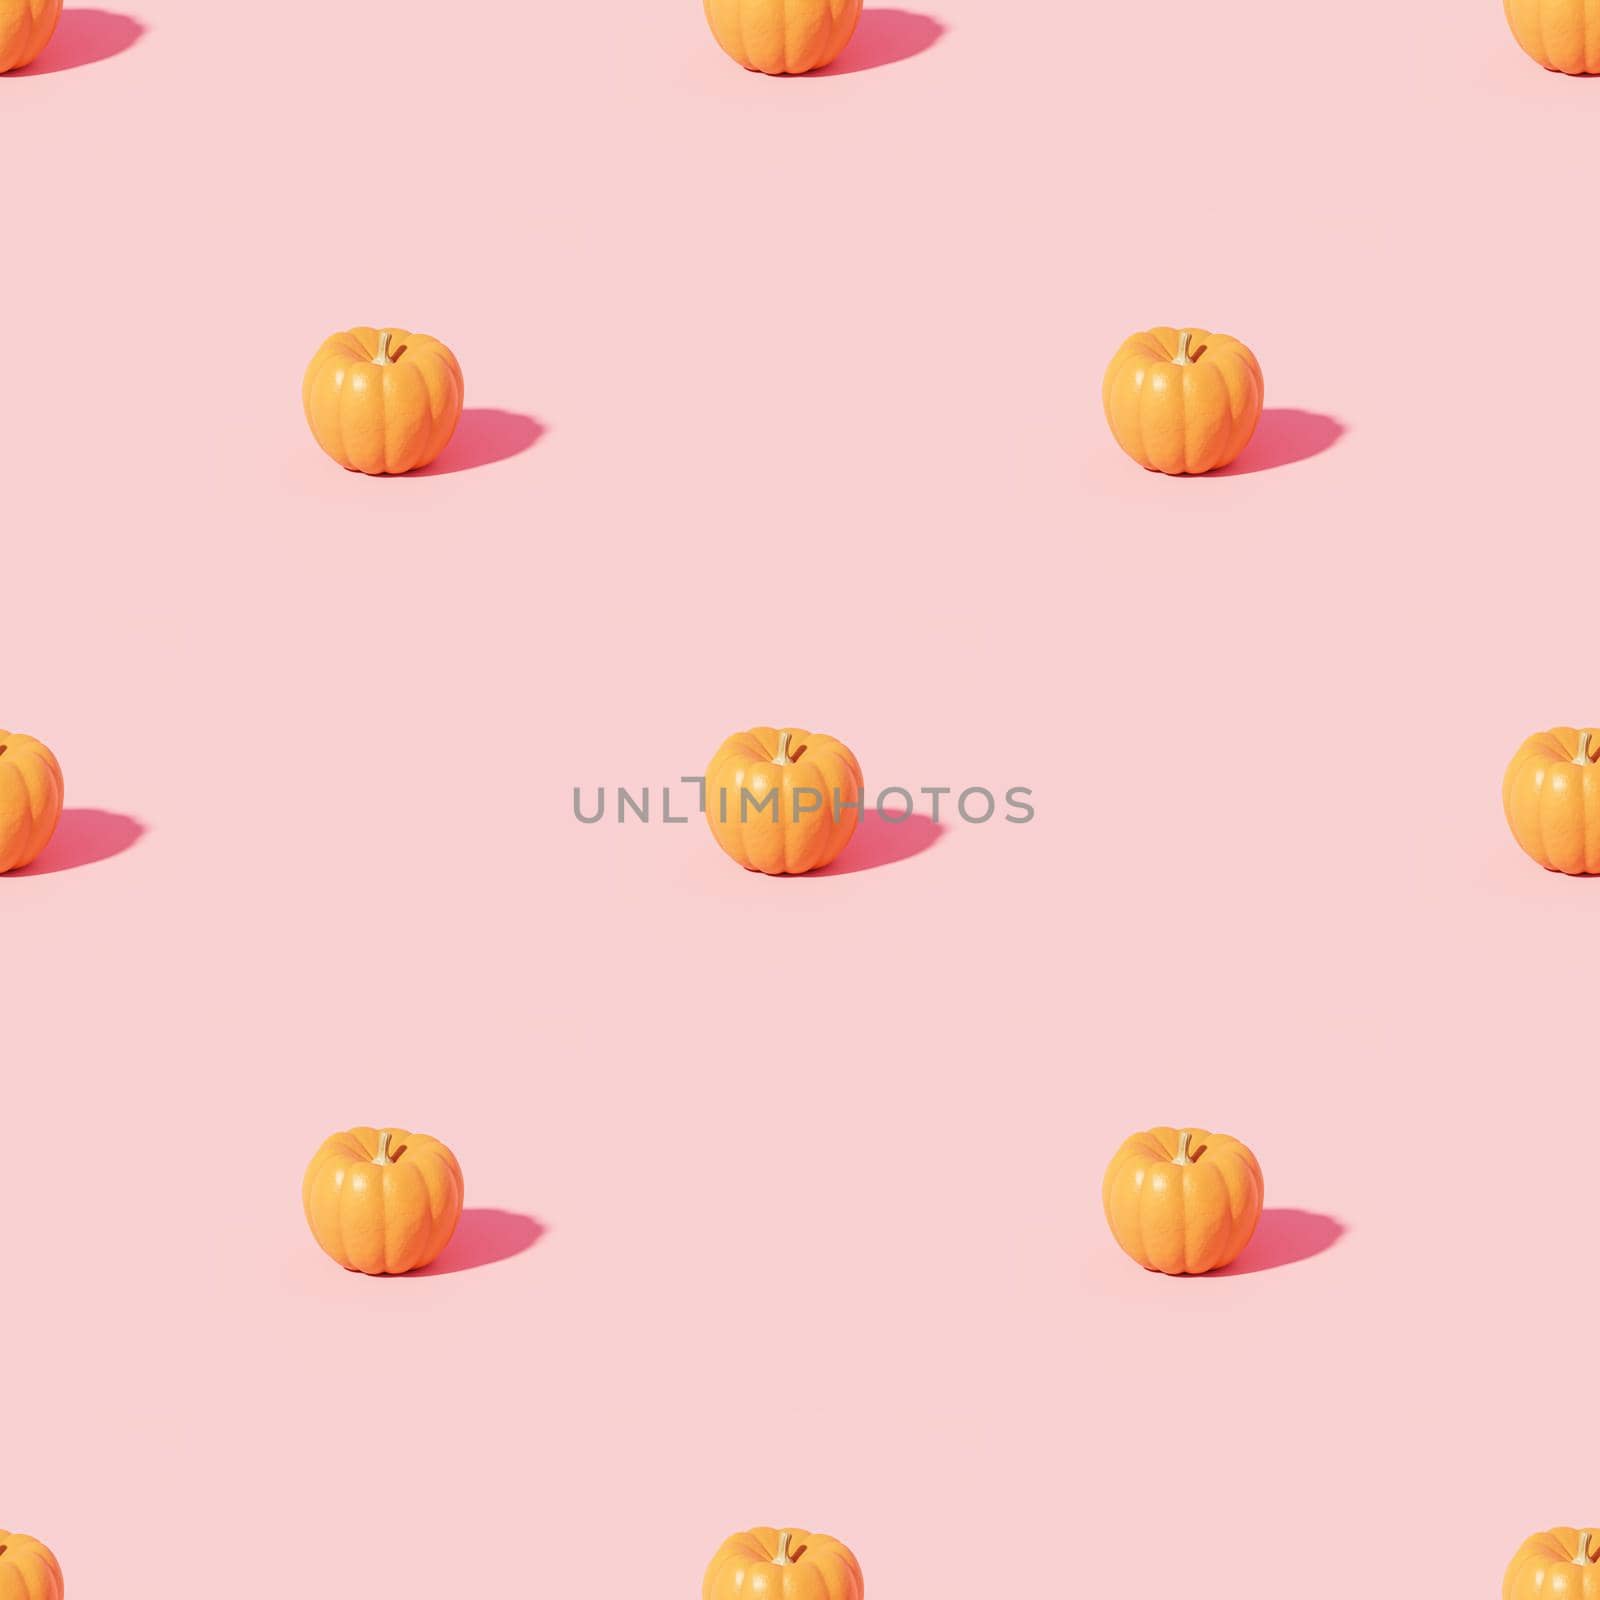 Pumpkins pattern on pink background for advertising on autumn holidays or sales, 3d render